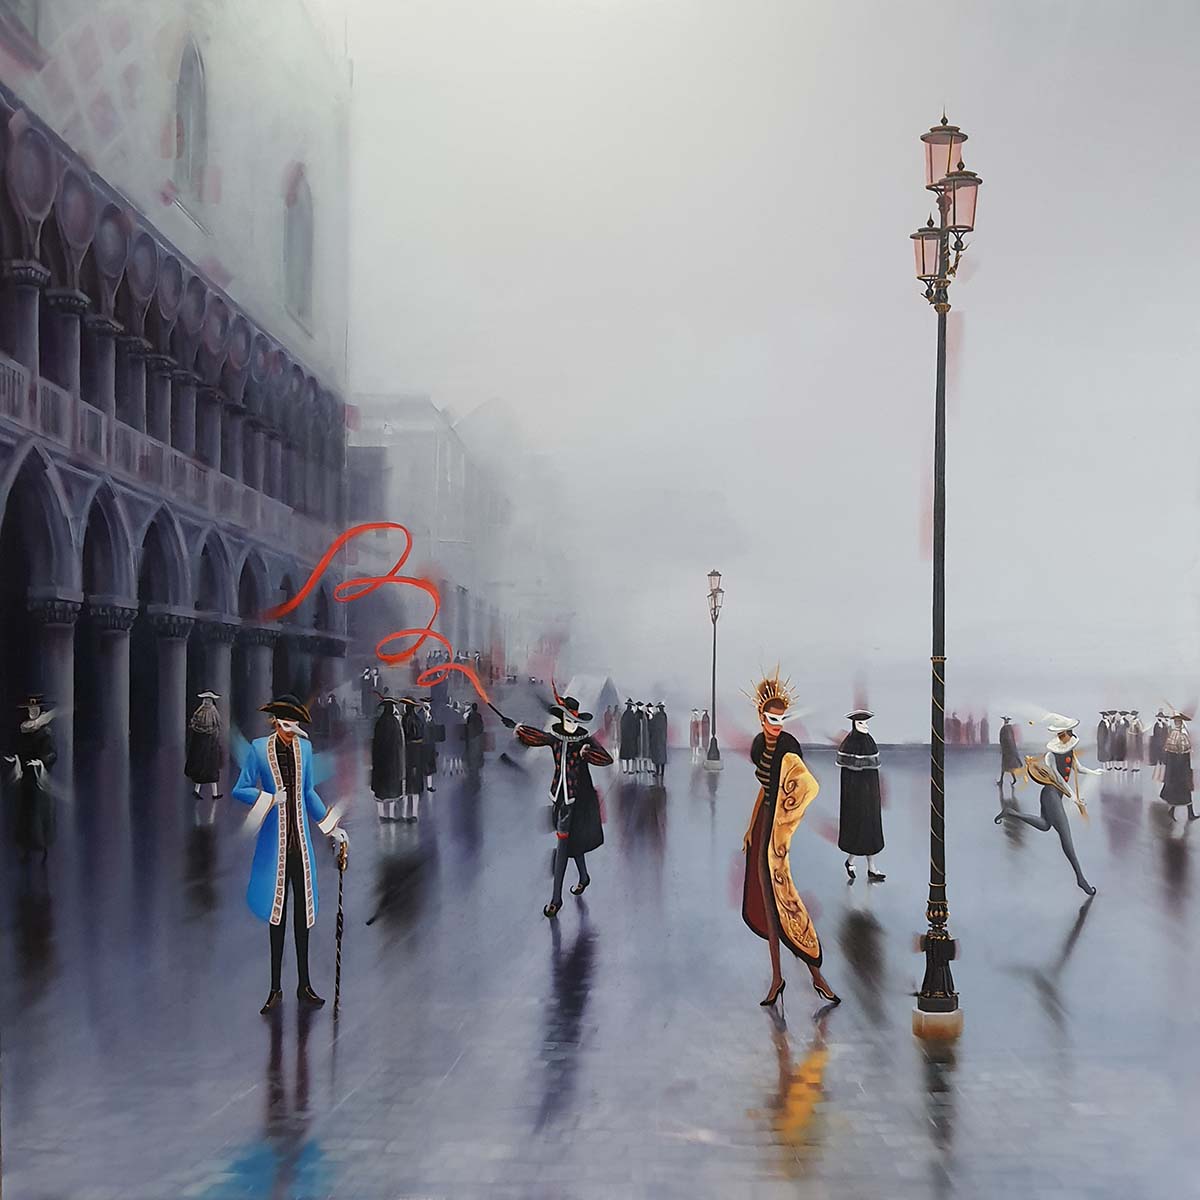 Contemporary Art. Title: Carnival Ambiance, Oil, 48x48 inches by Canadian Artist Kamiar Gajoum.